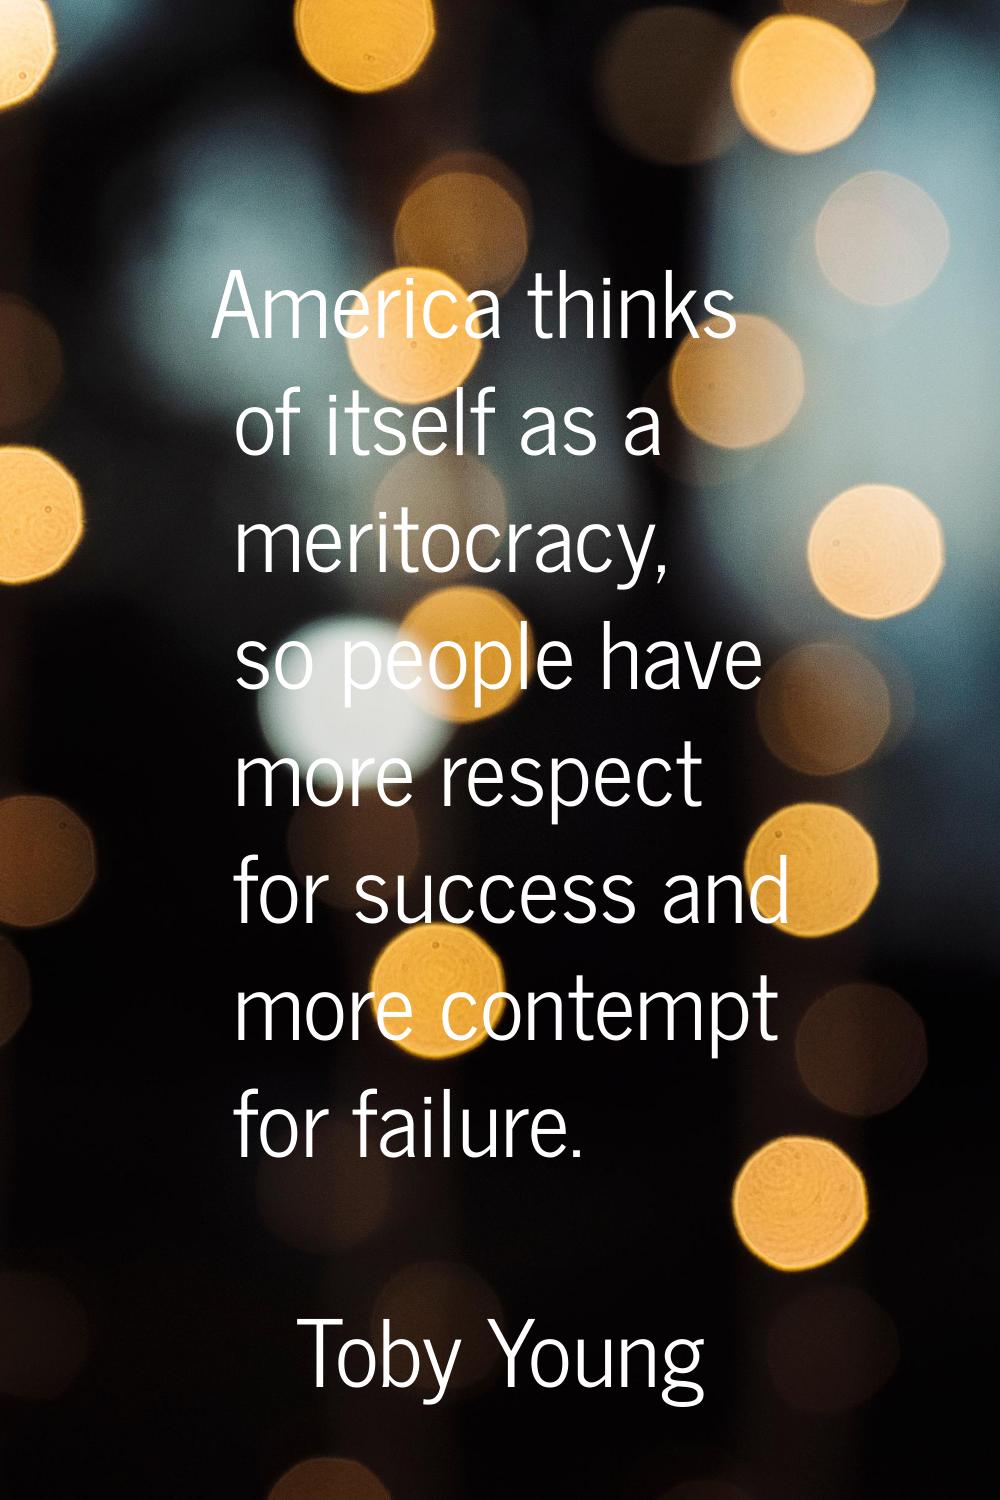 America thinks of itself as a meritocracy, so people have more respect for success and more contemp